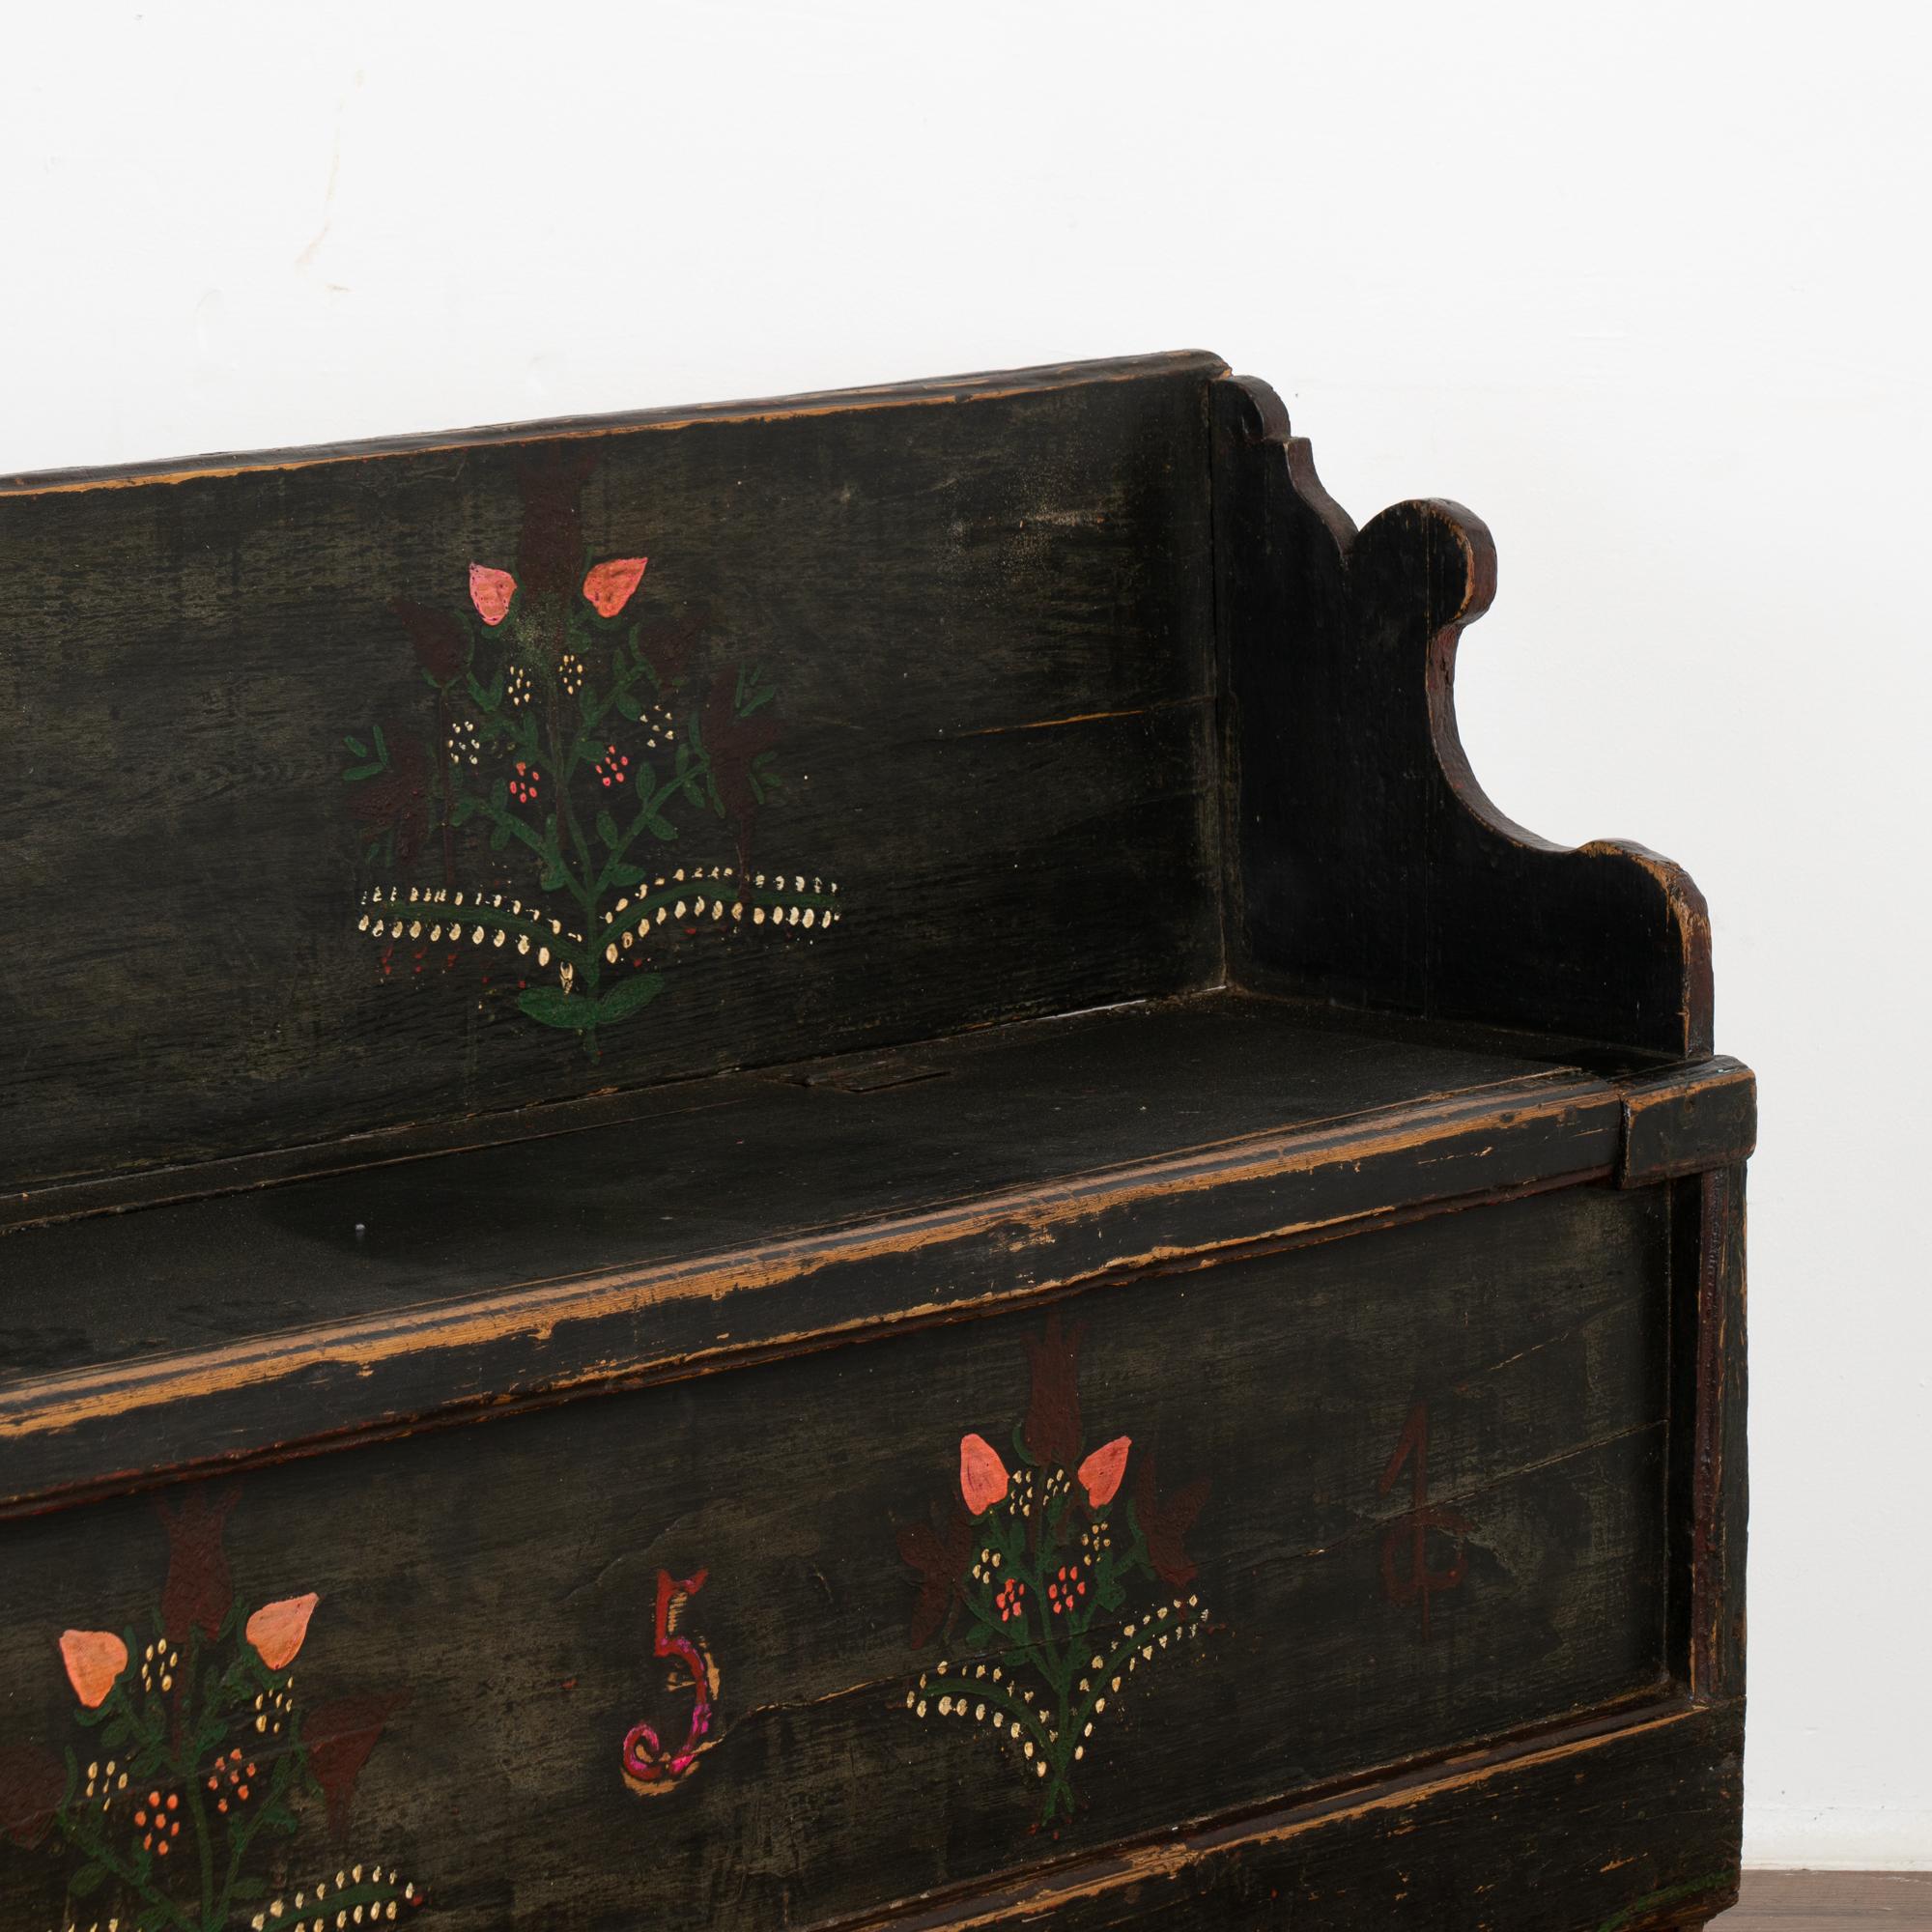 Original Black Painted Narrow Pine Bench With Storage, Hungary dated 1951 For Sale 1